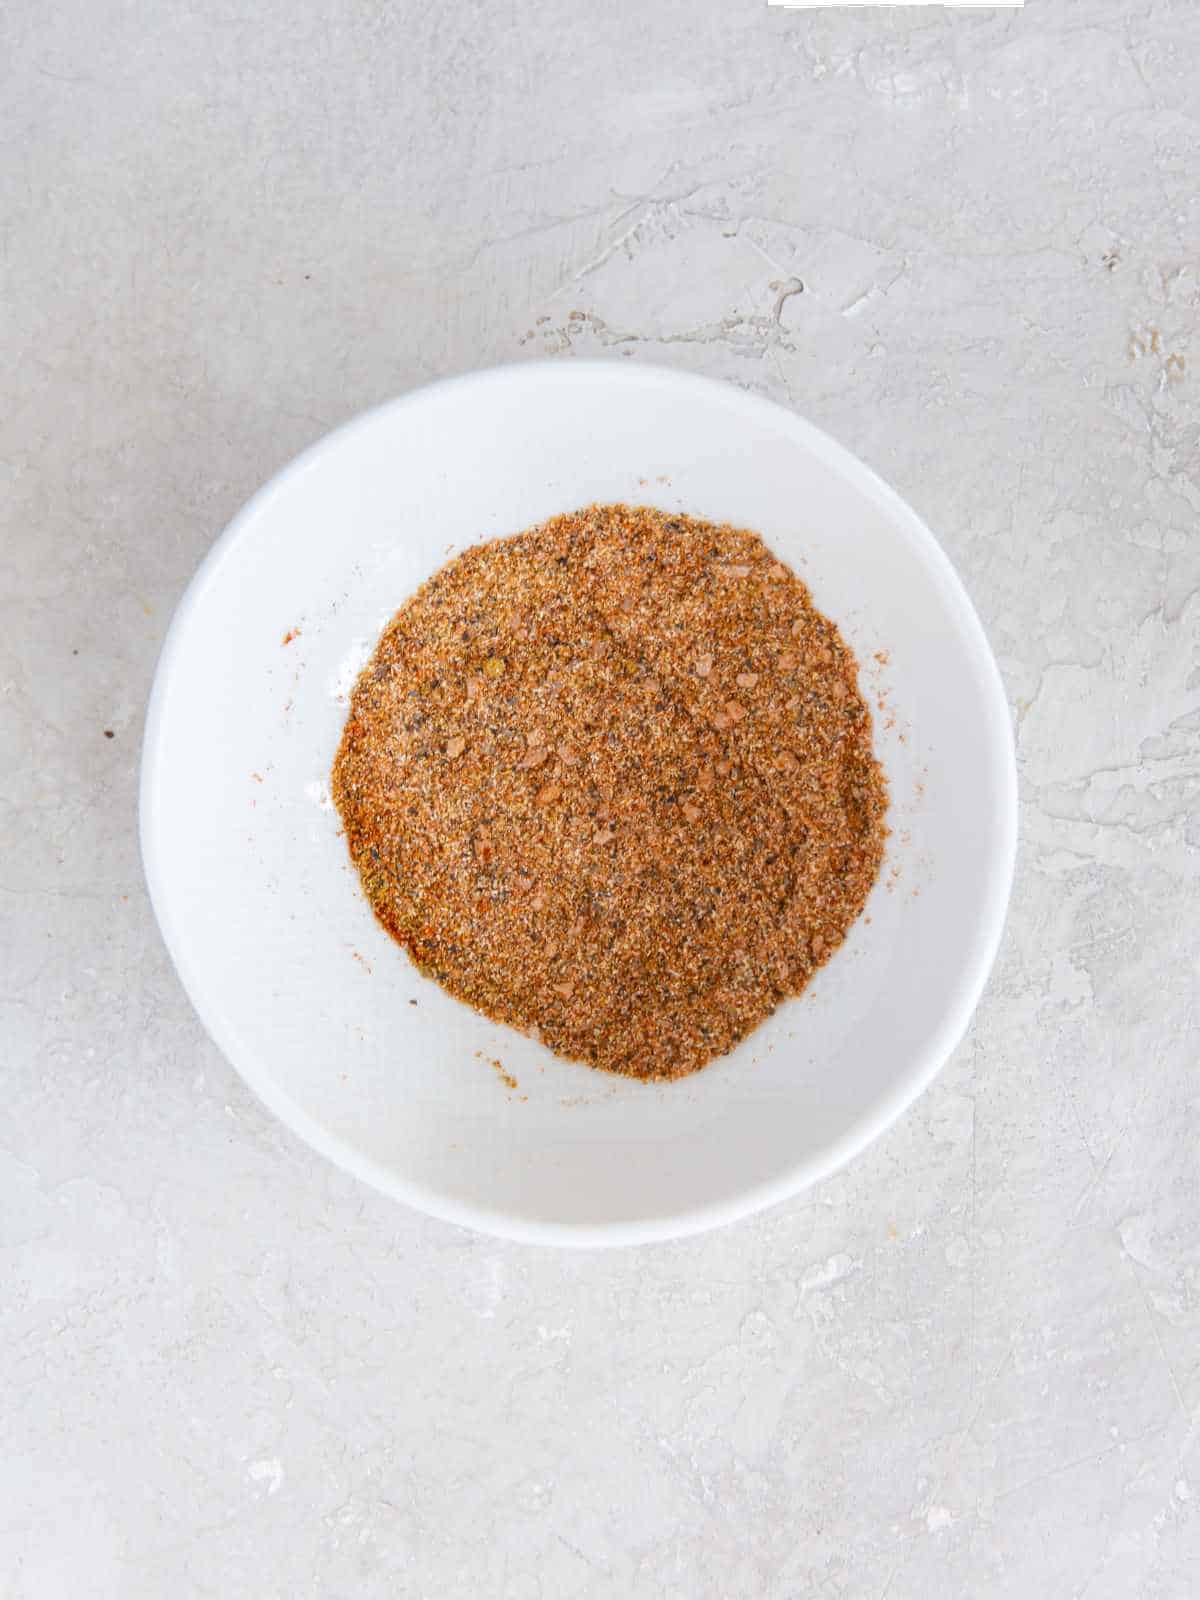 mixed St. Louis rib rub blended in a bowl.